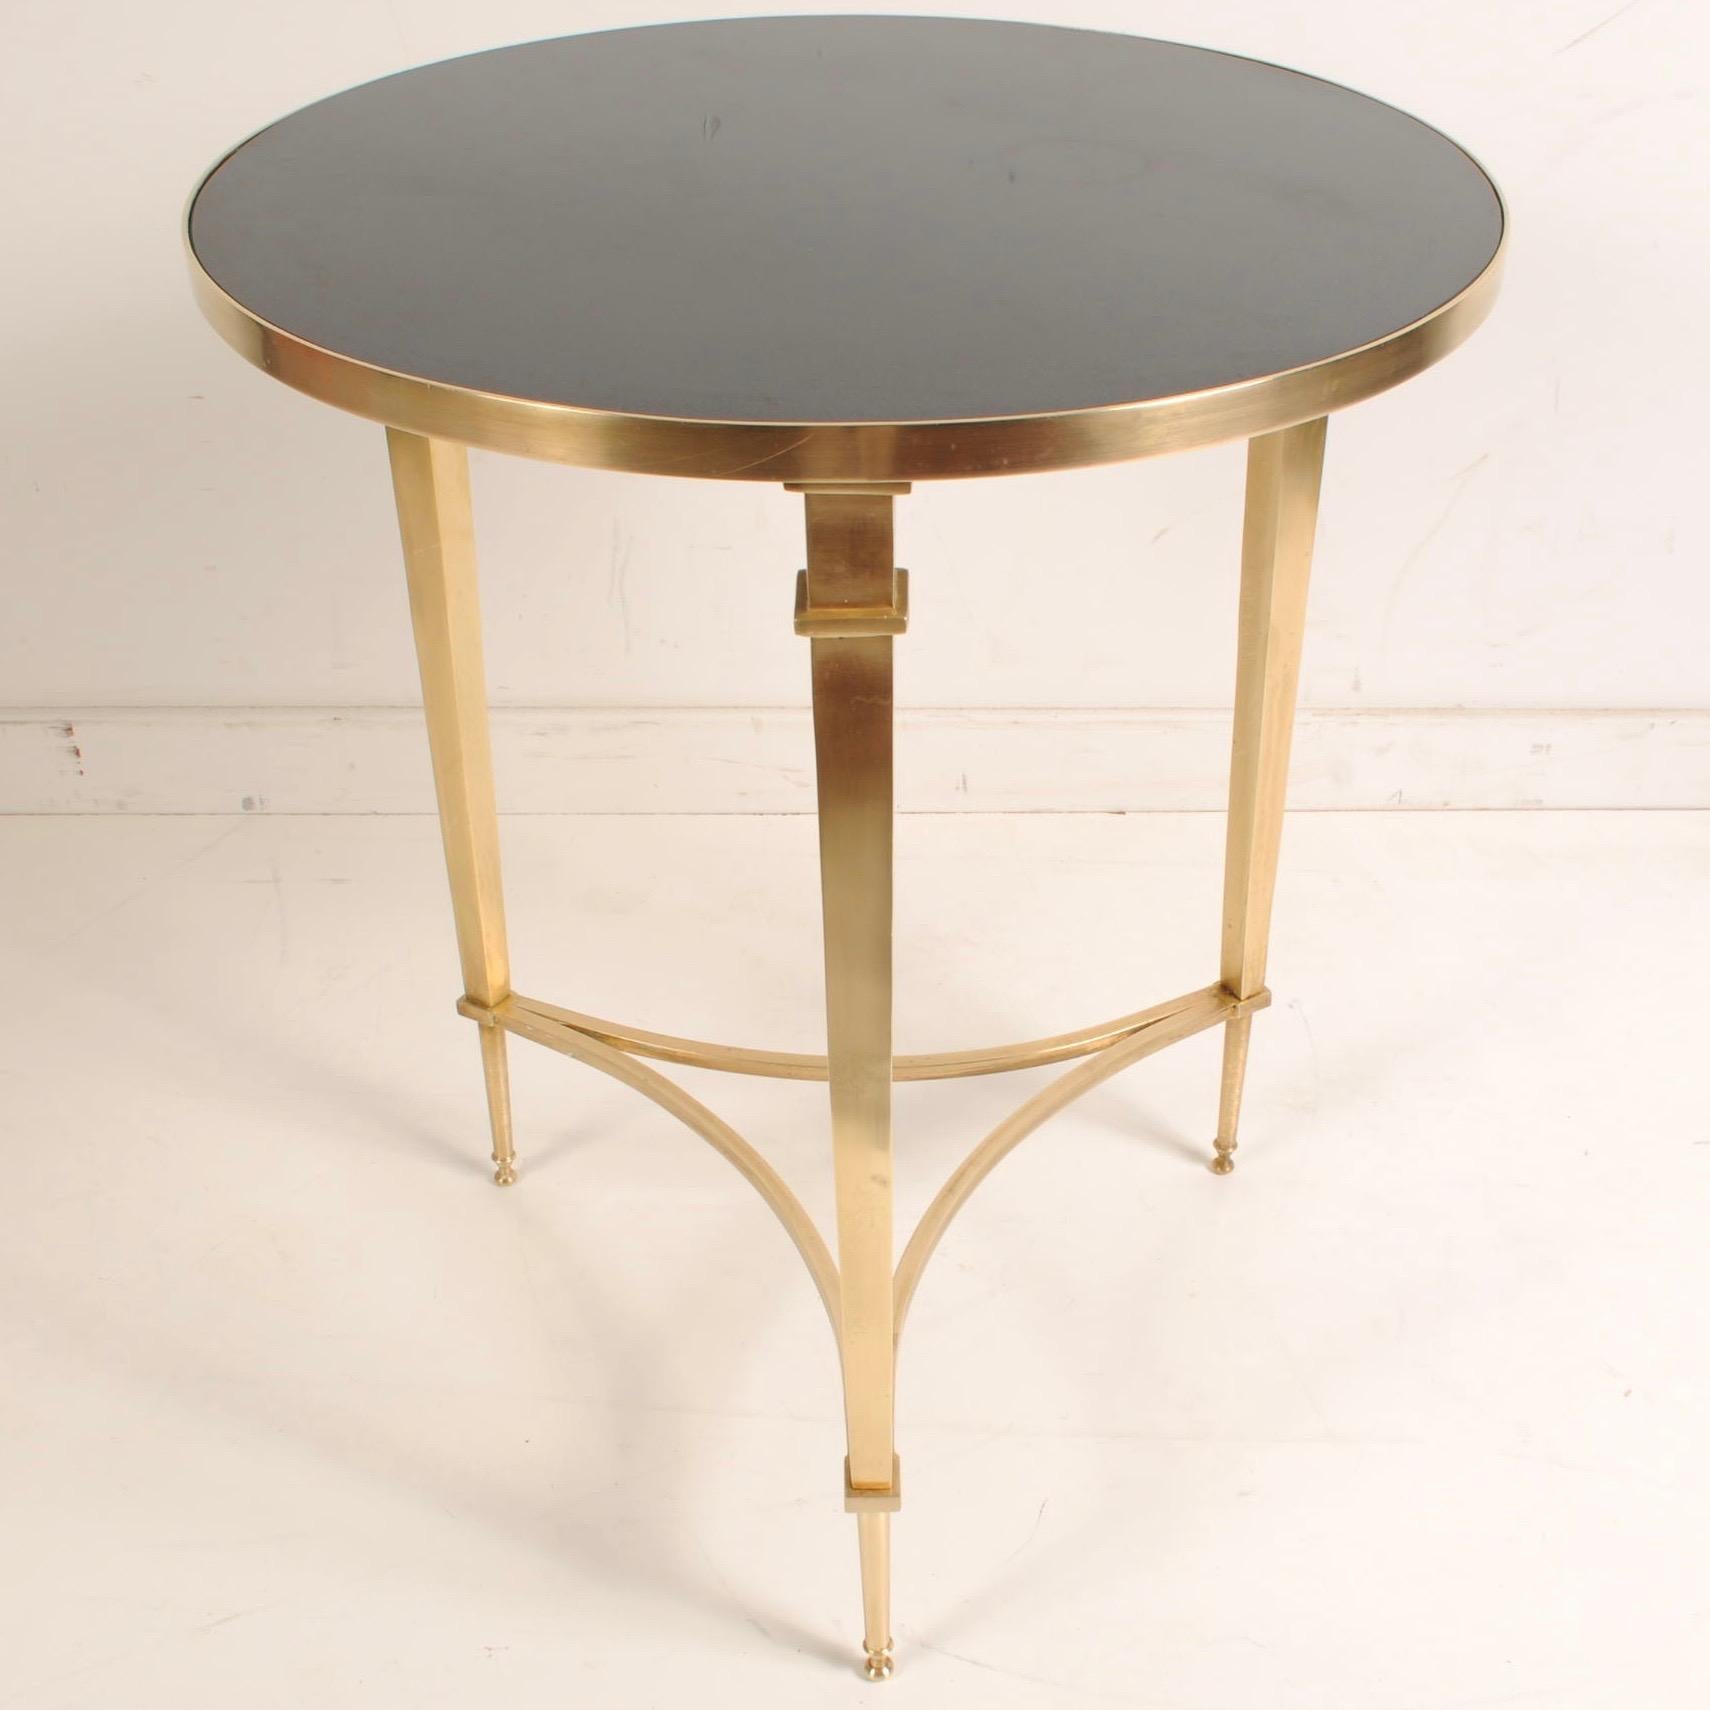 Round French Square Leg Brass and Black Granite Table by Global Views 1